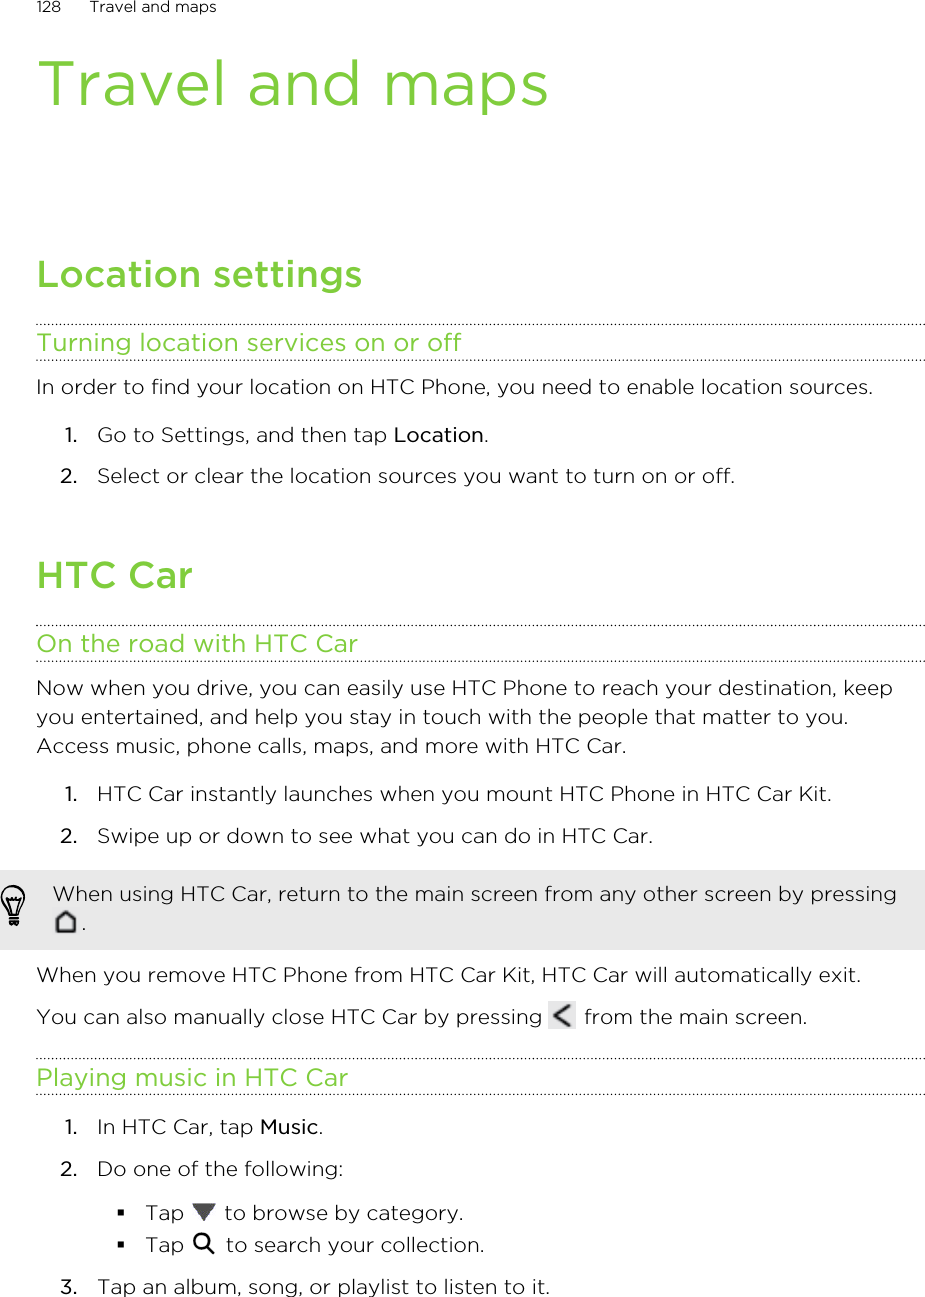 Travel and mapsLocation settingsTurning location services on or offIn order to find your location on HTC Phone, you need to enable location sources.1. Go to Settings, and then tap Location.2. Select or clear the location sources you want to turn on or off.HTC CarOn the road with HTC CarNow when you drive, you can easily use HTC Phone to reach your destination, keepyou entertained, and help you stay in touch with the people that matter to you.Access music, phone calls, maps, and more with HTC Car.1. HTC Car instantly launches when you mount HTC Phone in HTC Car Kit.2. Swipe up or down to see what you can do in HTC Car.When using HTC Car, return to the main screen from any other screen by pressing.When you remove HTC Phone from HTC Car Kit, HTC Car will automatically exit.You can also manually close HTC Car by pressing   from the main screen.Playing music in HTC Car1. In HTC Car, tap Music.2. Do one of the following:§Tap   to browse by category.§Tap   to search your collection.3. Tap an album, song, or playlist to listen to it.128 Travel and maps